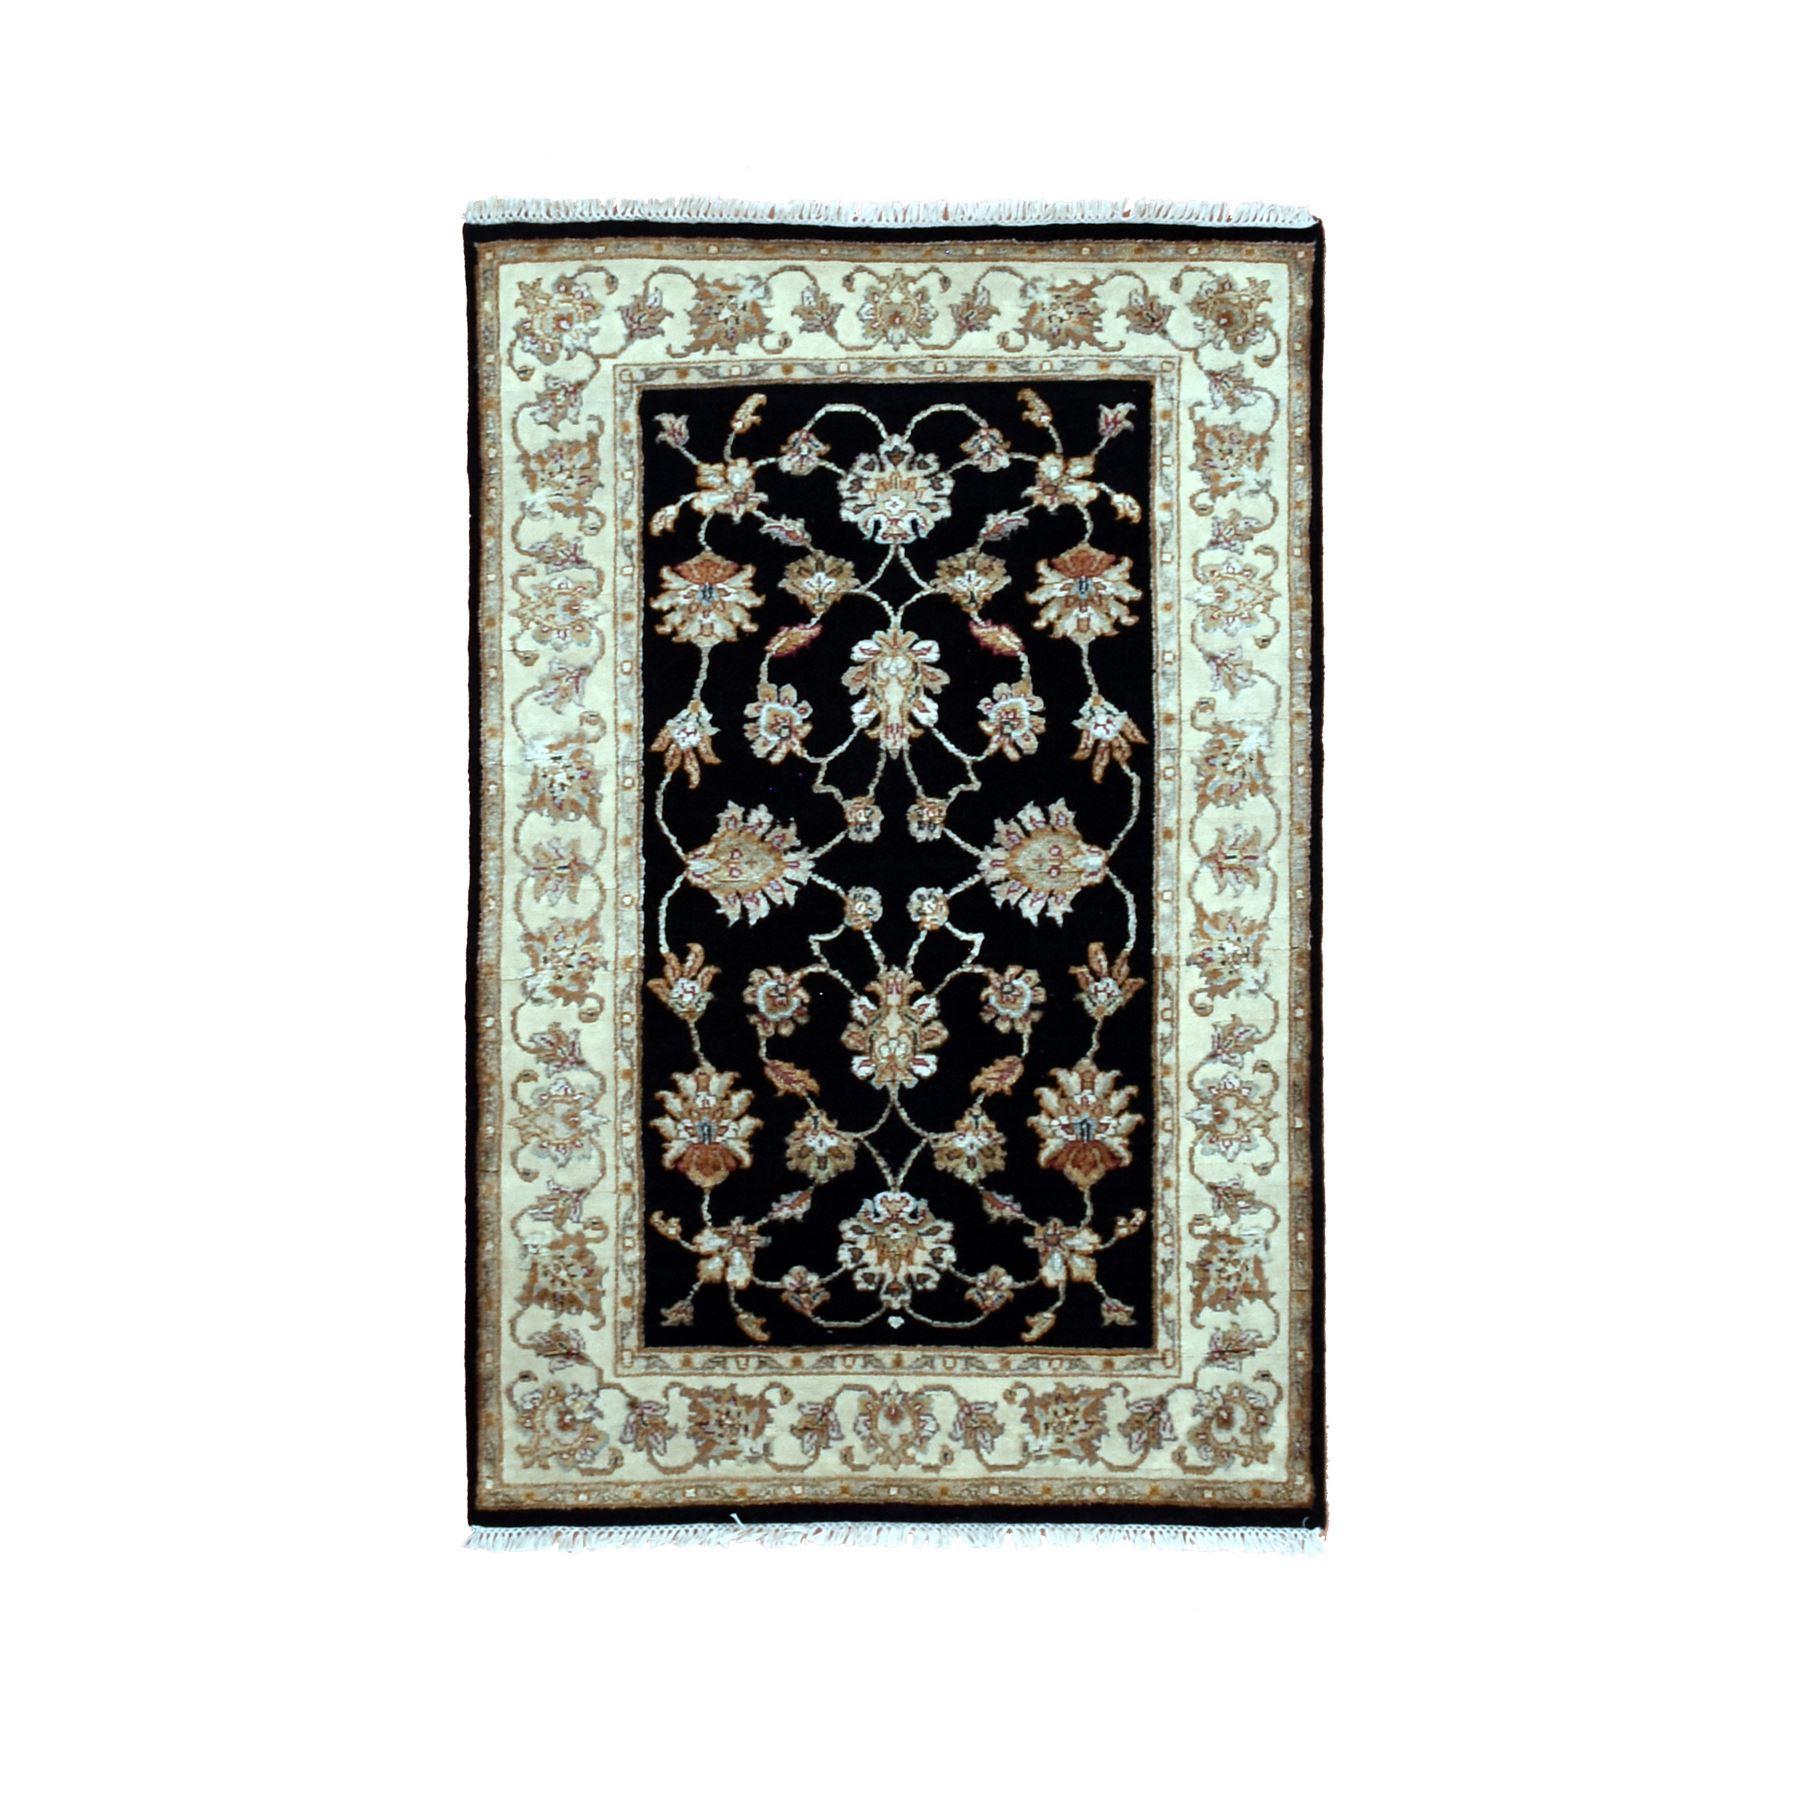 Rajasthan-Hand-Knotted-Rug-377030